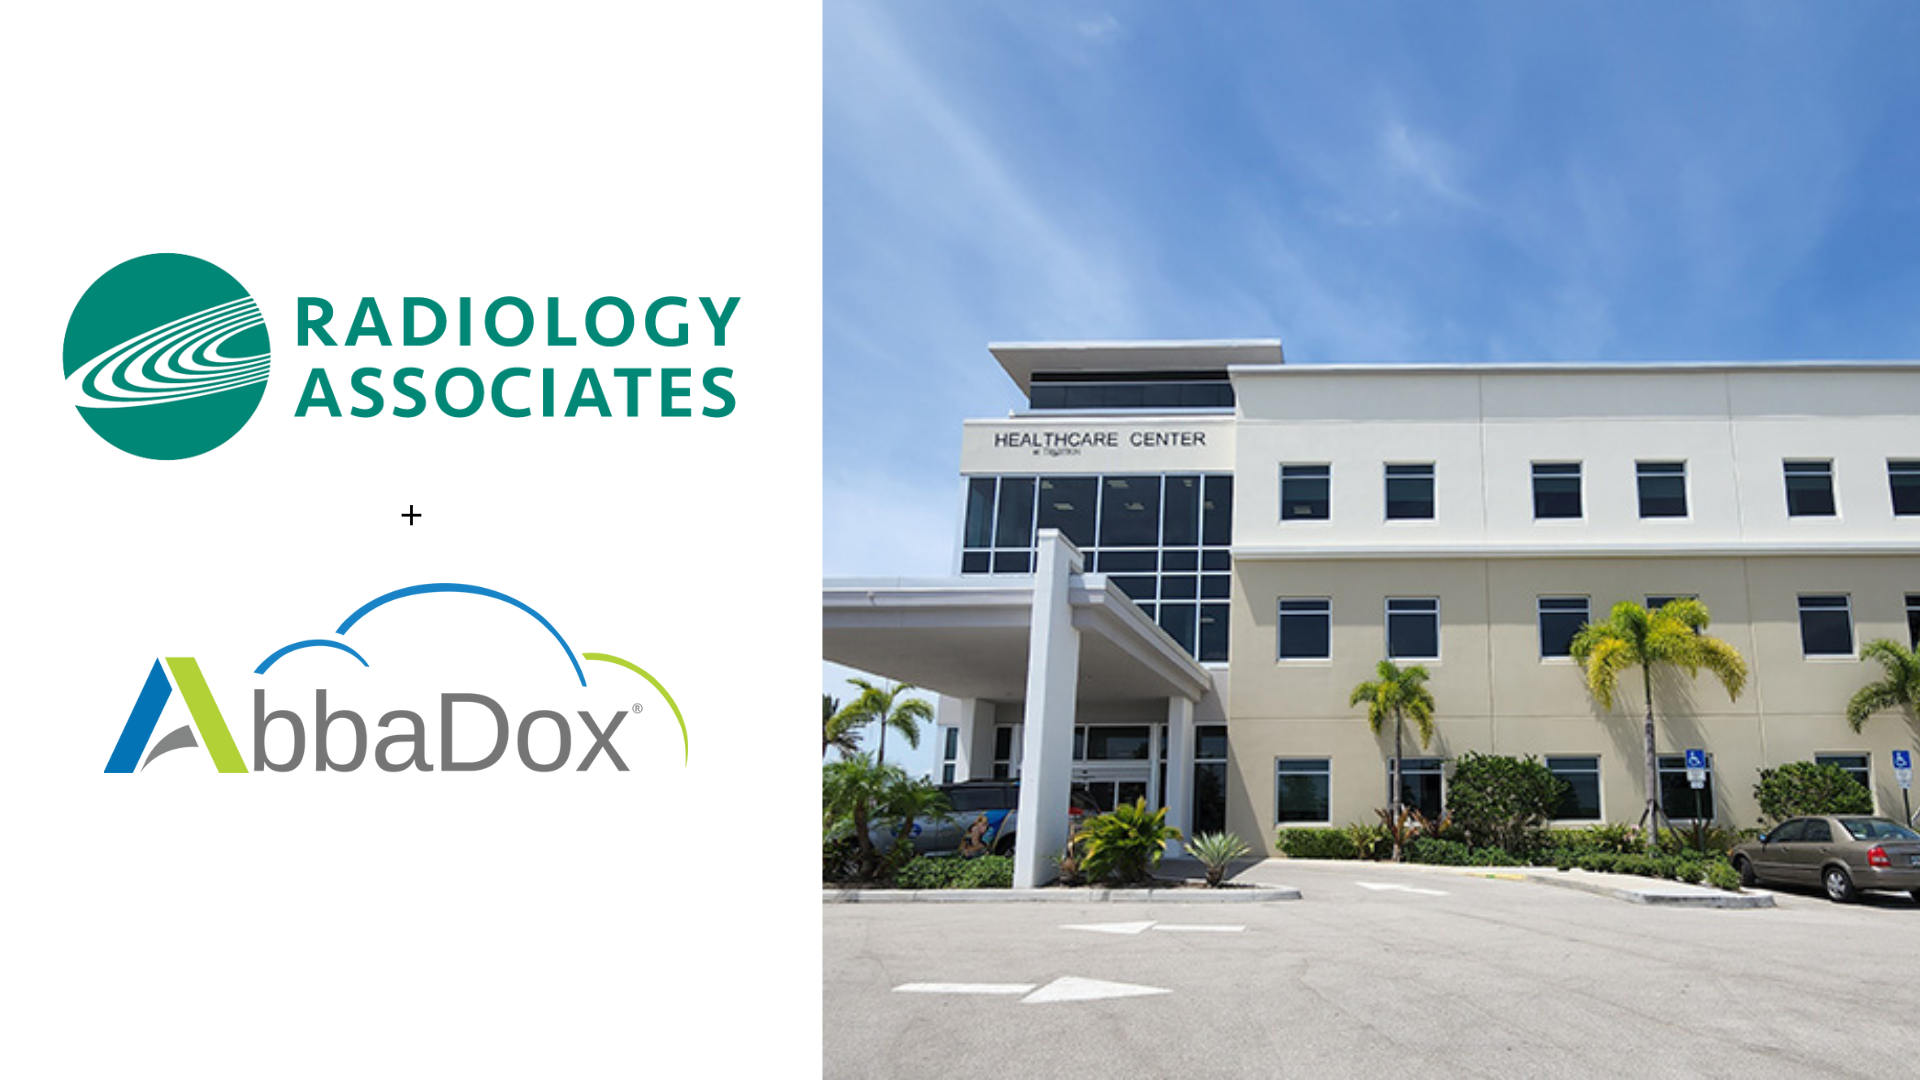 AbbaDox Announces Partnership with Radiology Imaging Associates